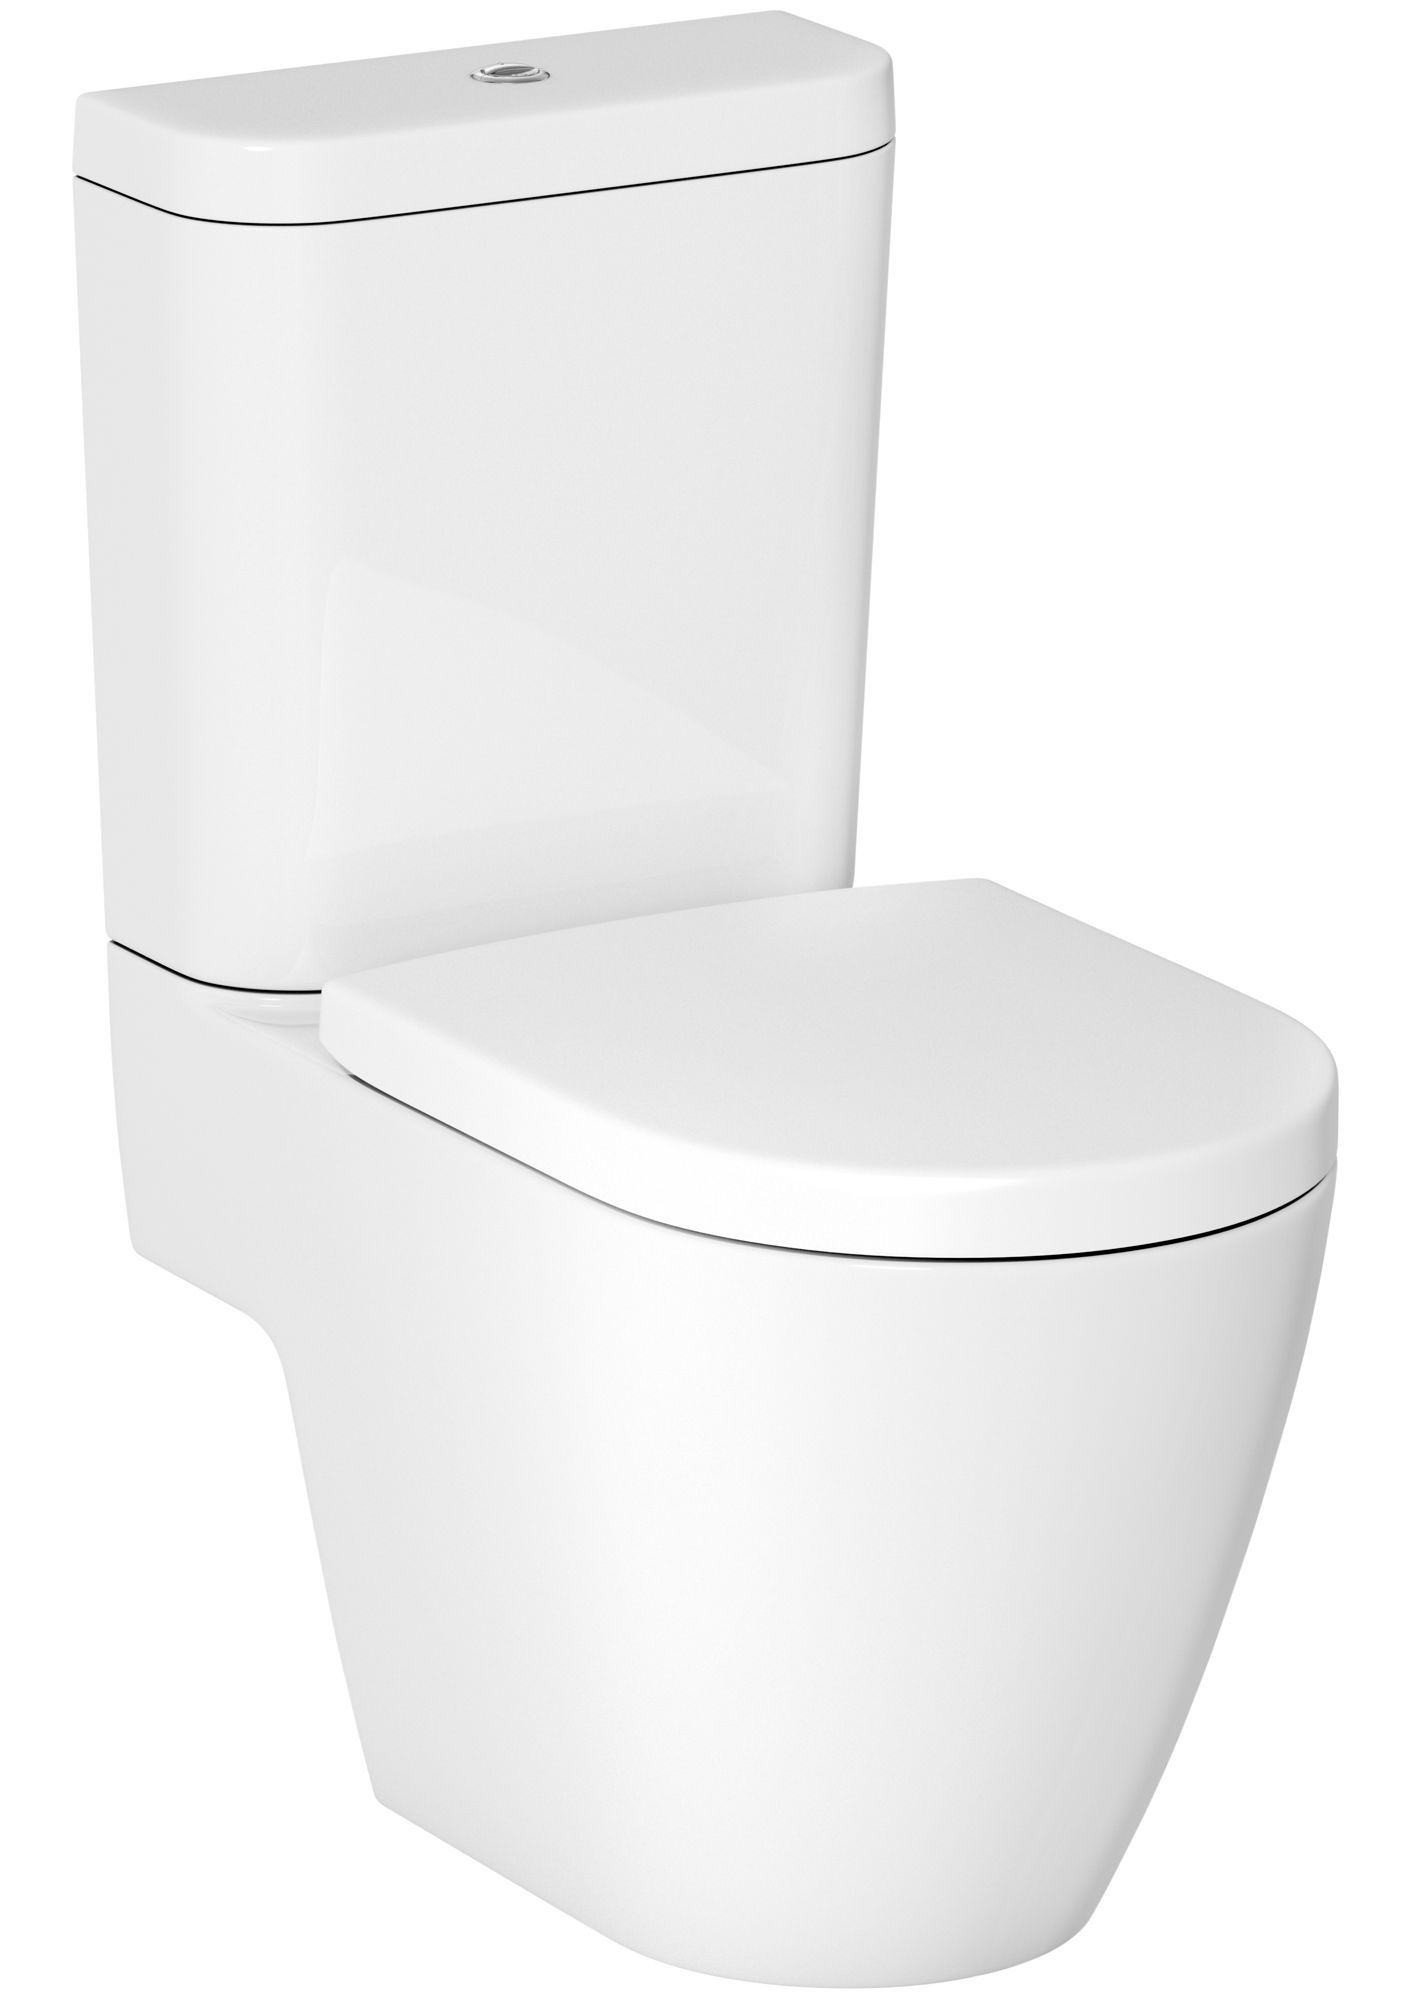 GoodHome Helena White Open back close-coupled Floor-mounted Toilet & cloakroom basin